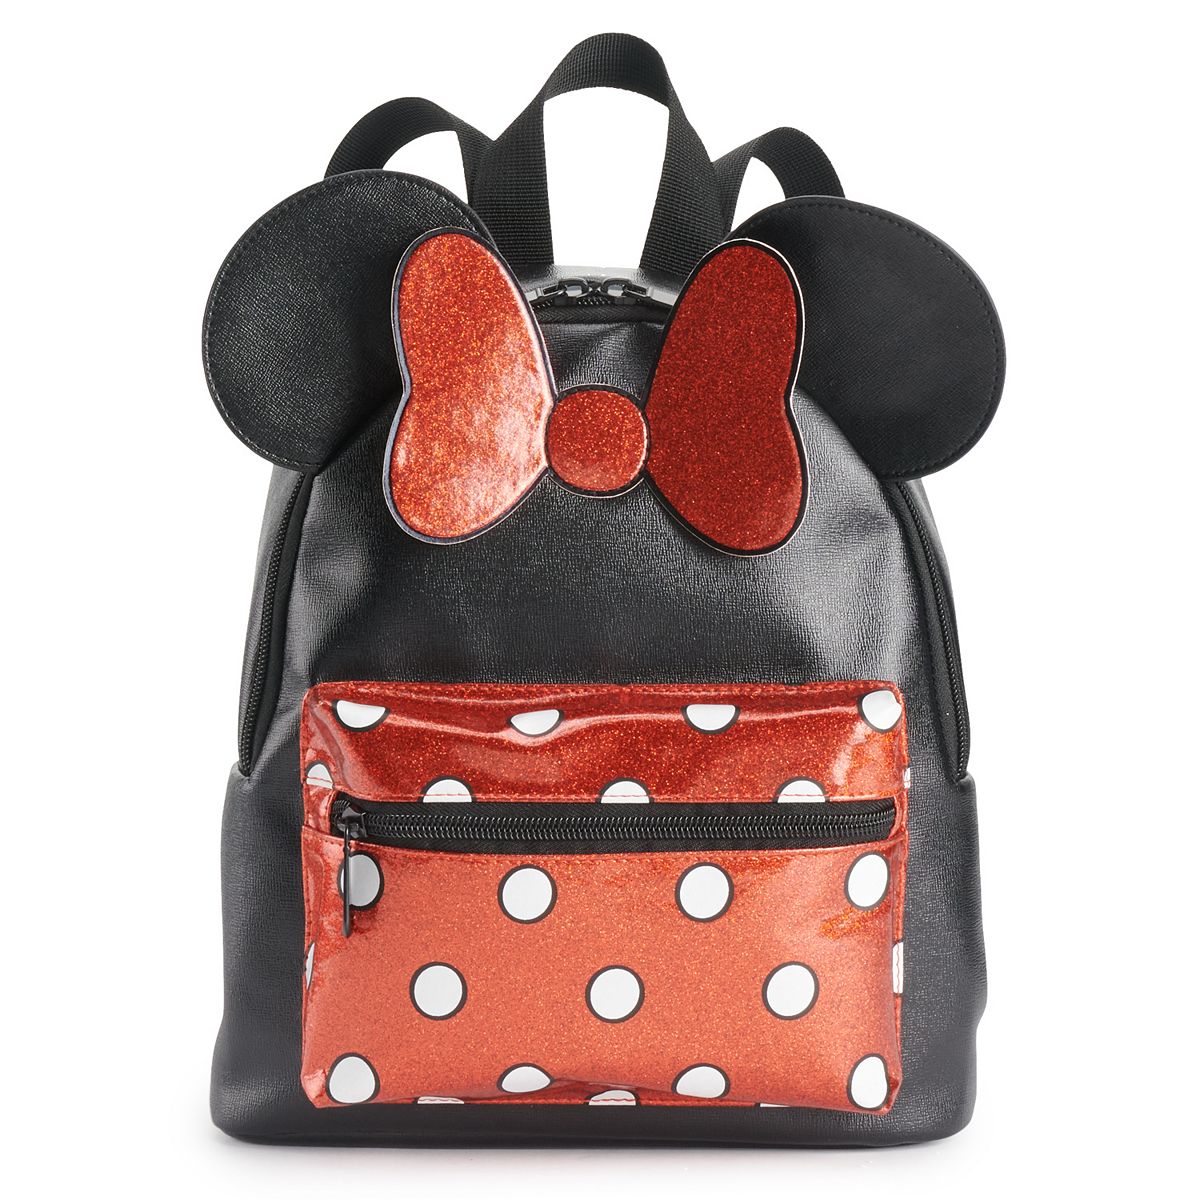 New Markdowns on Disney Bags and Wallets at Kohl's | Wallets from $10 ...